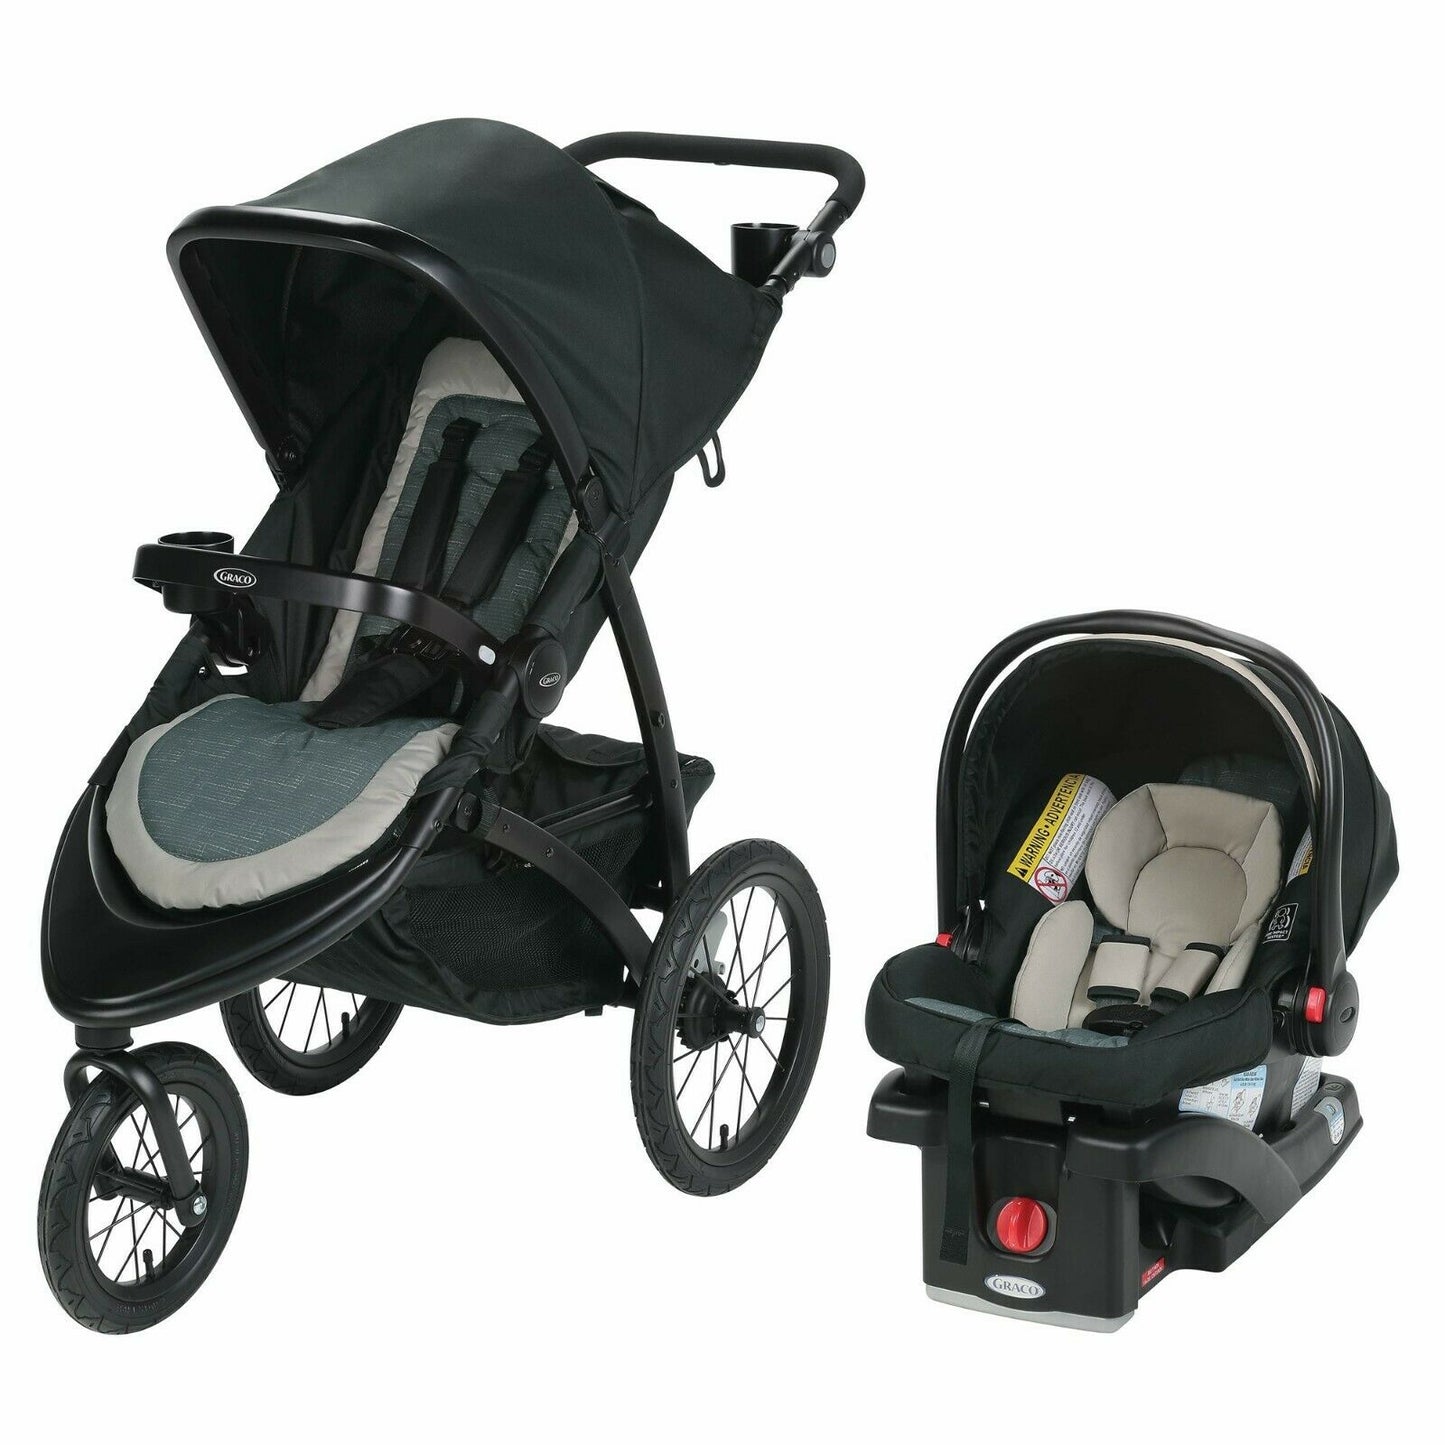 Graco Baby Stroller Jogger Travel System with Car Seat Playard Bassinet Combo